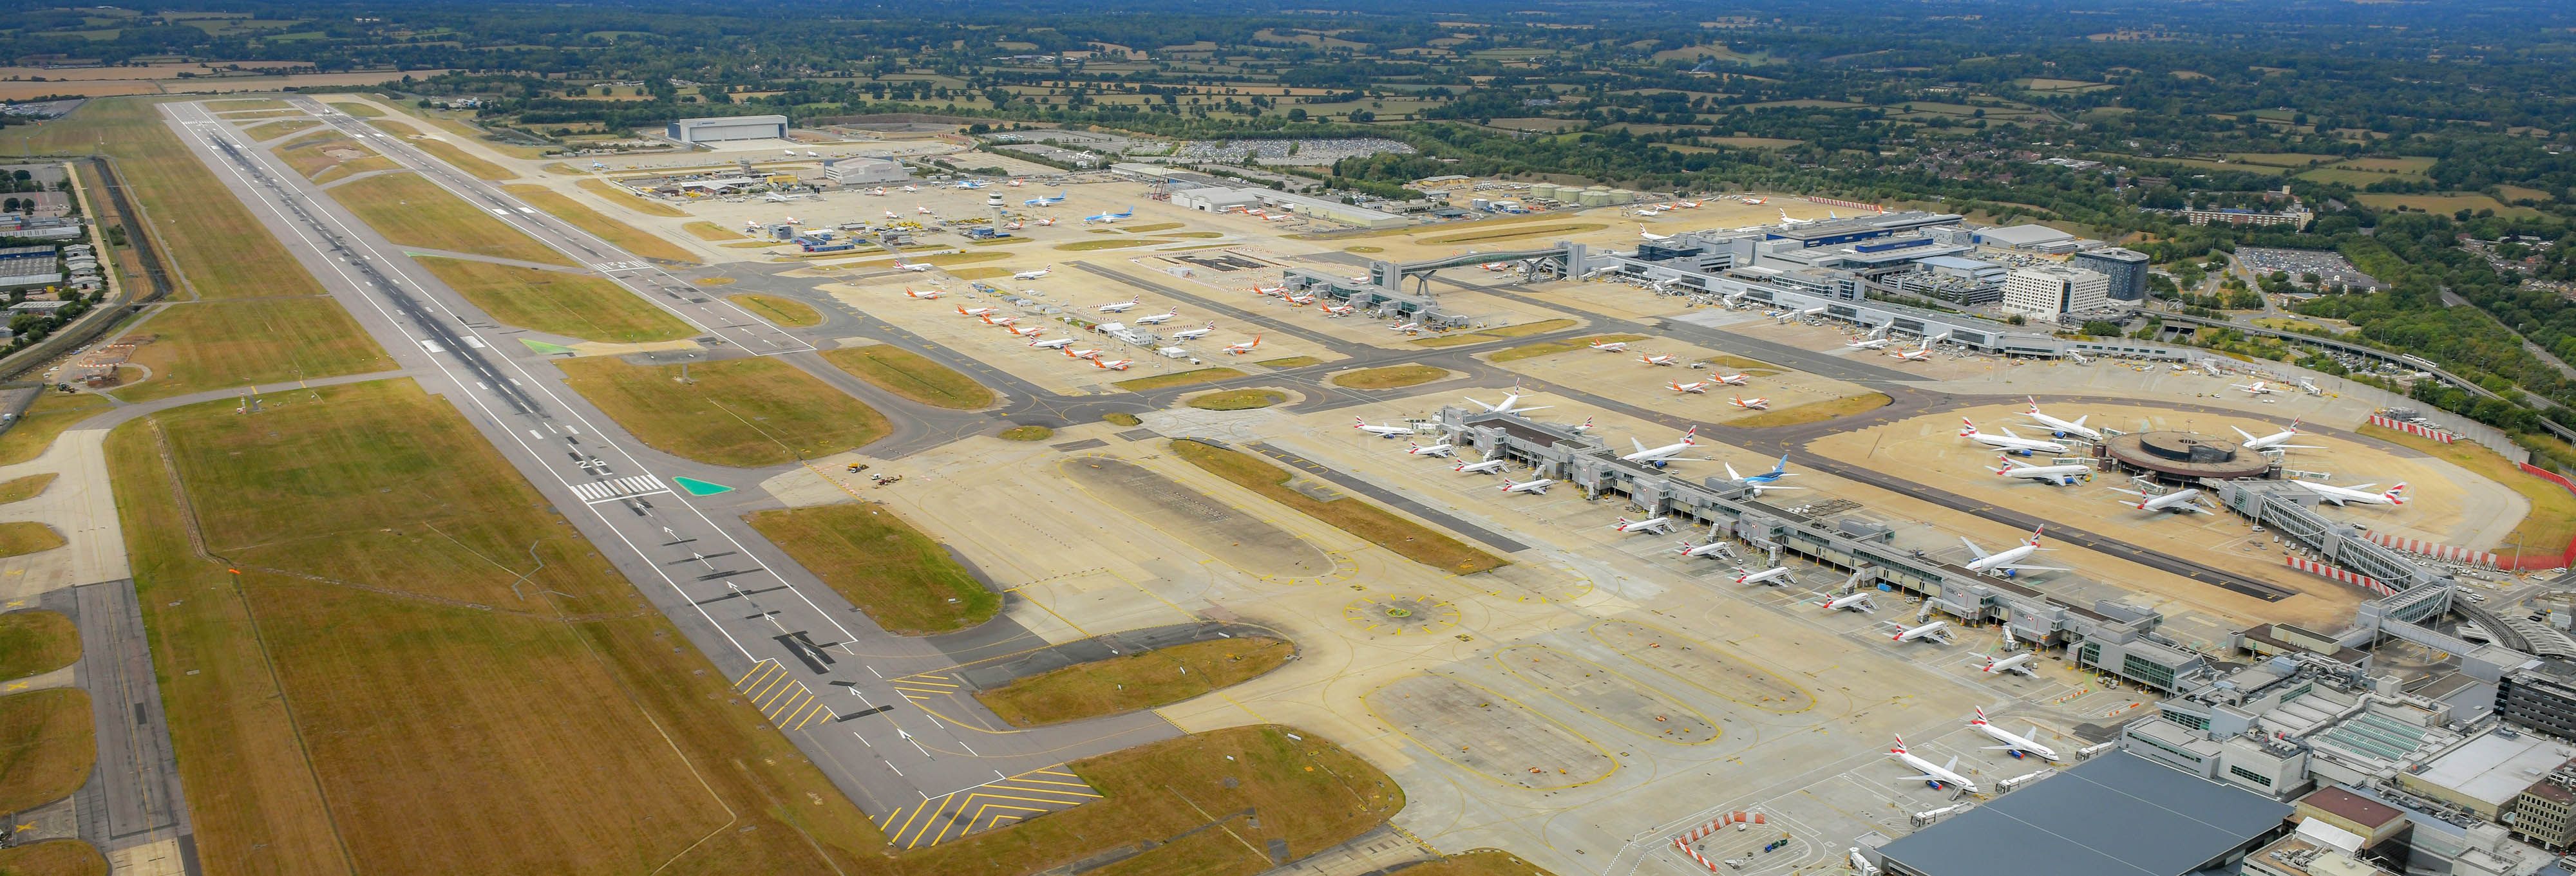 An aerial view of London Gatwick Airport.